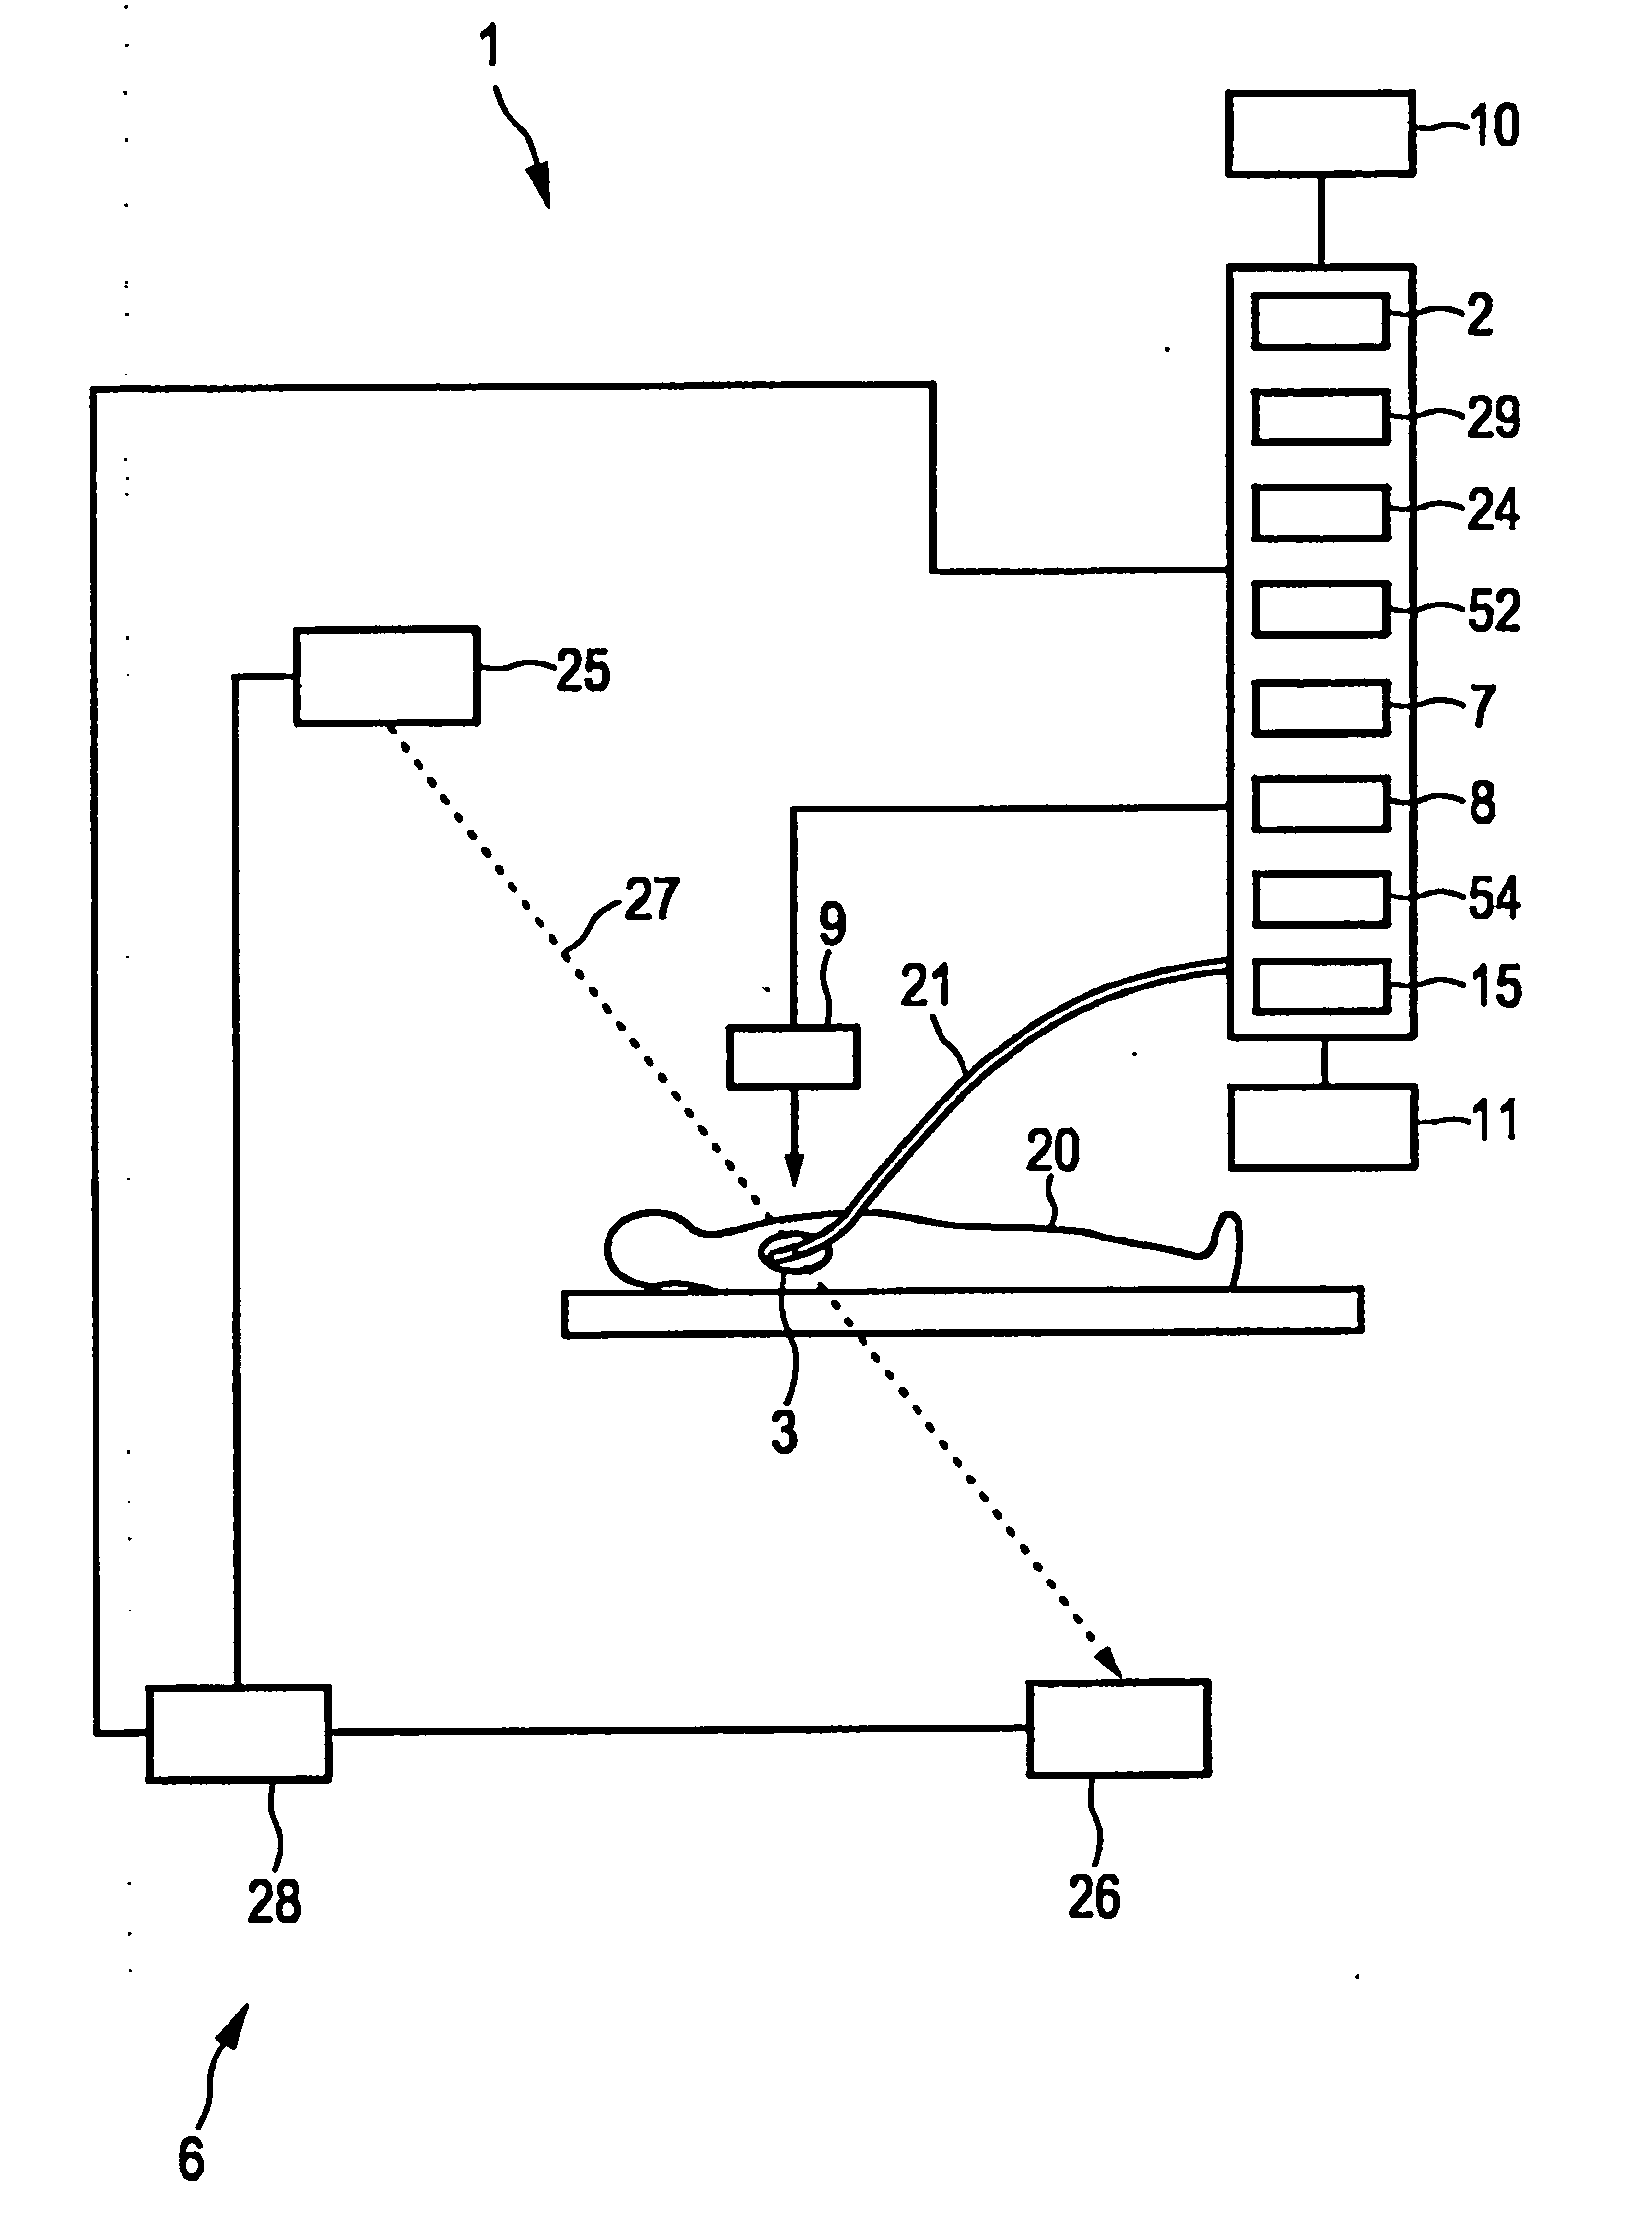 Property determining apparatus for determining a property of an object